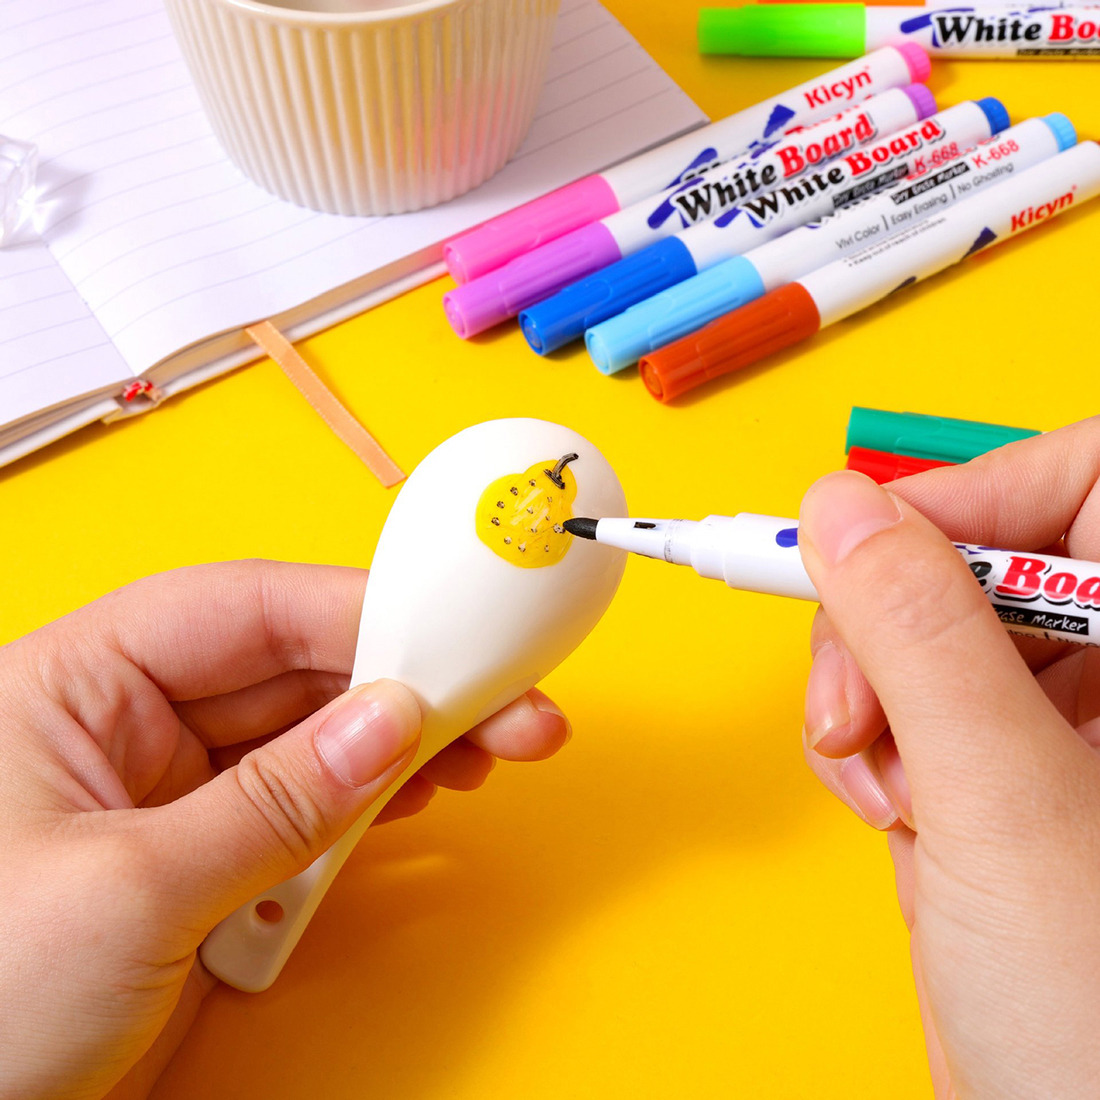 Floating pen,Magical Pen ,Magic Pens for Kids,Floating Doodle Pen,Magical  water painting,Unique stationery, 12 Marker, 1 Ceramic Spoon